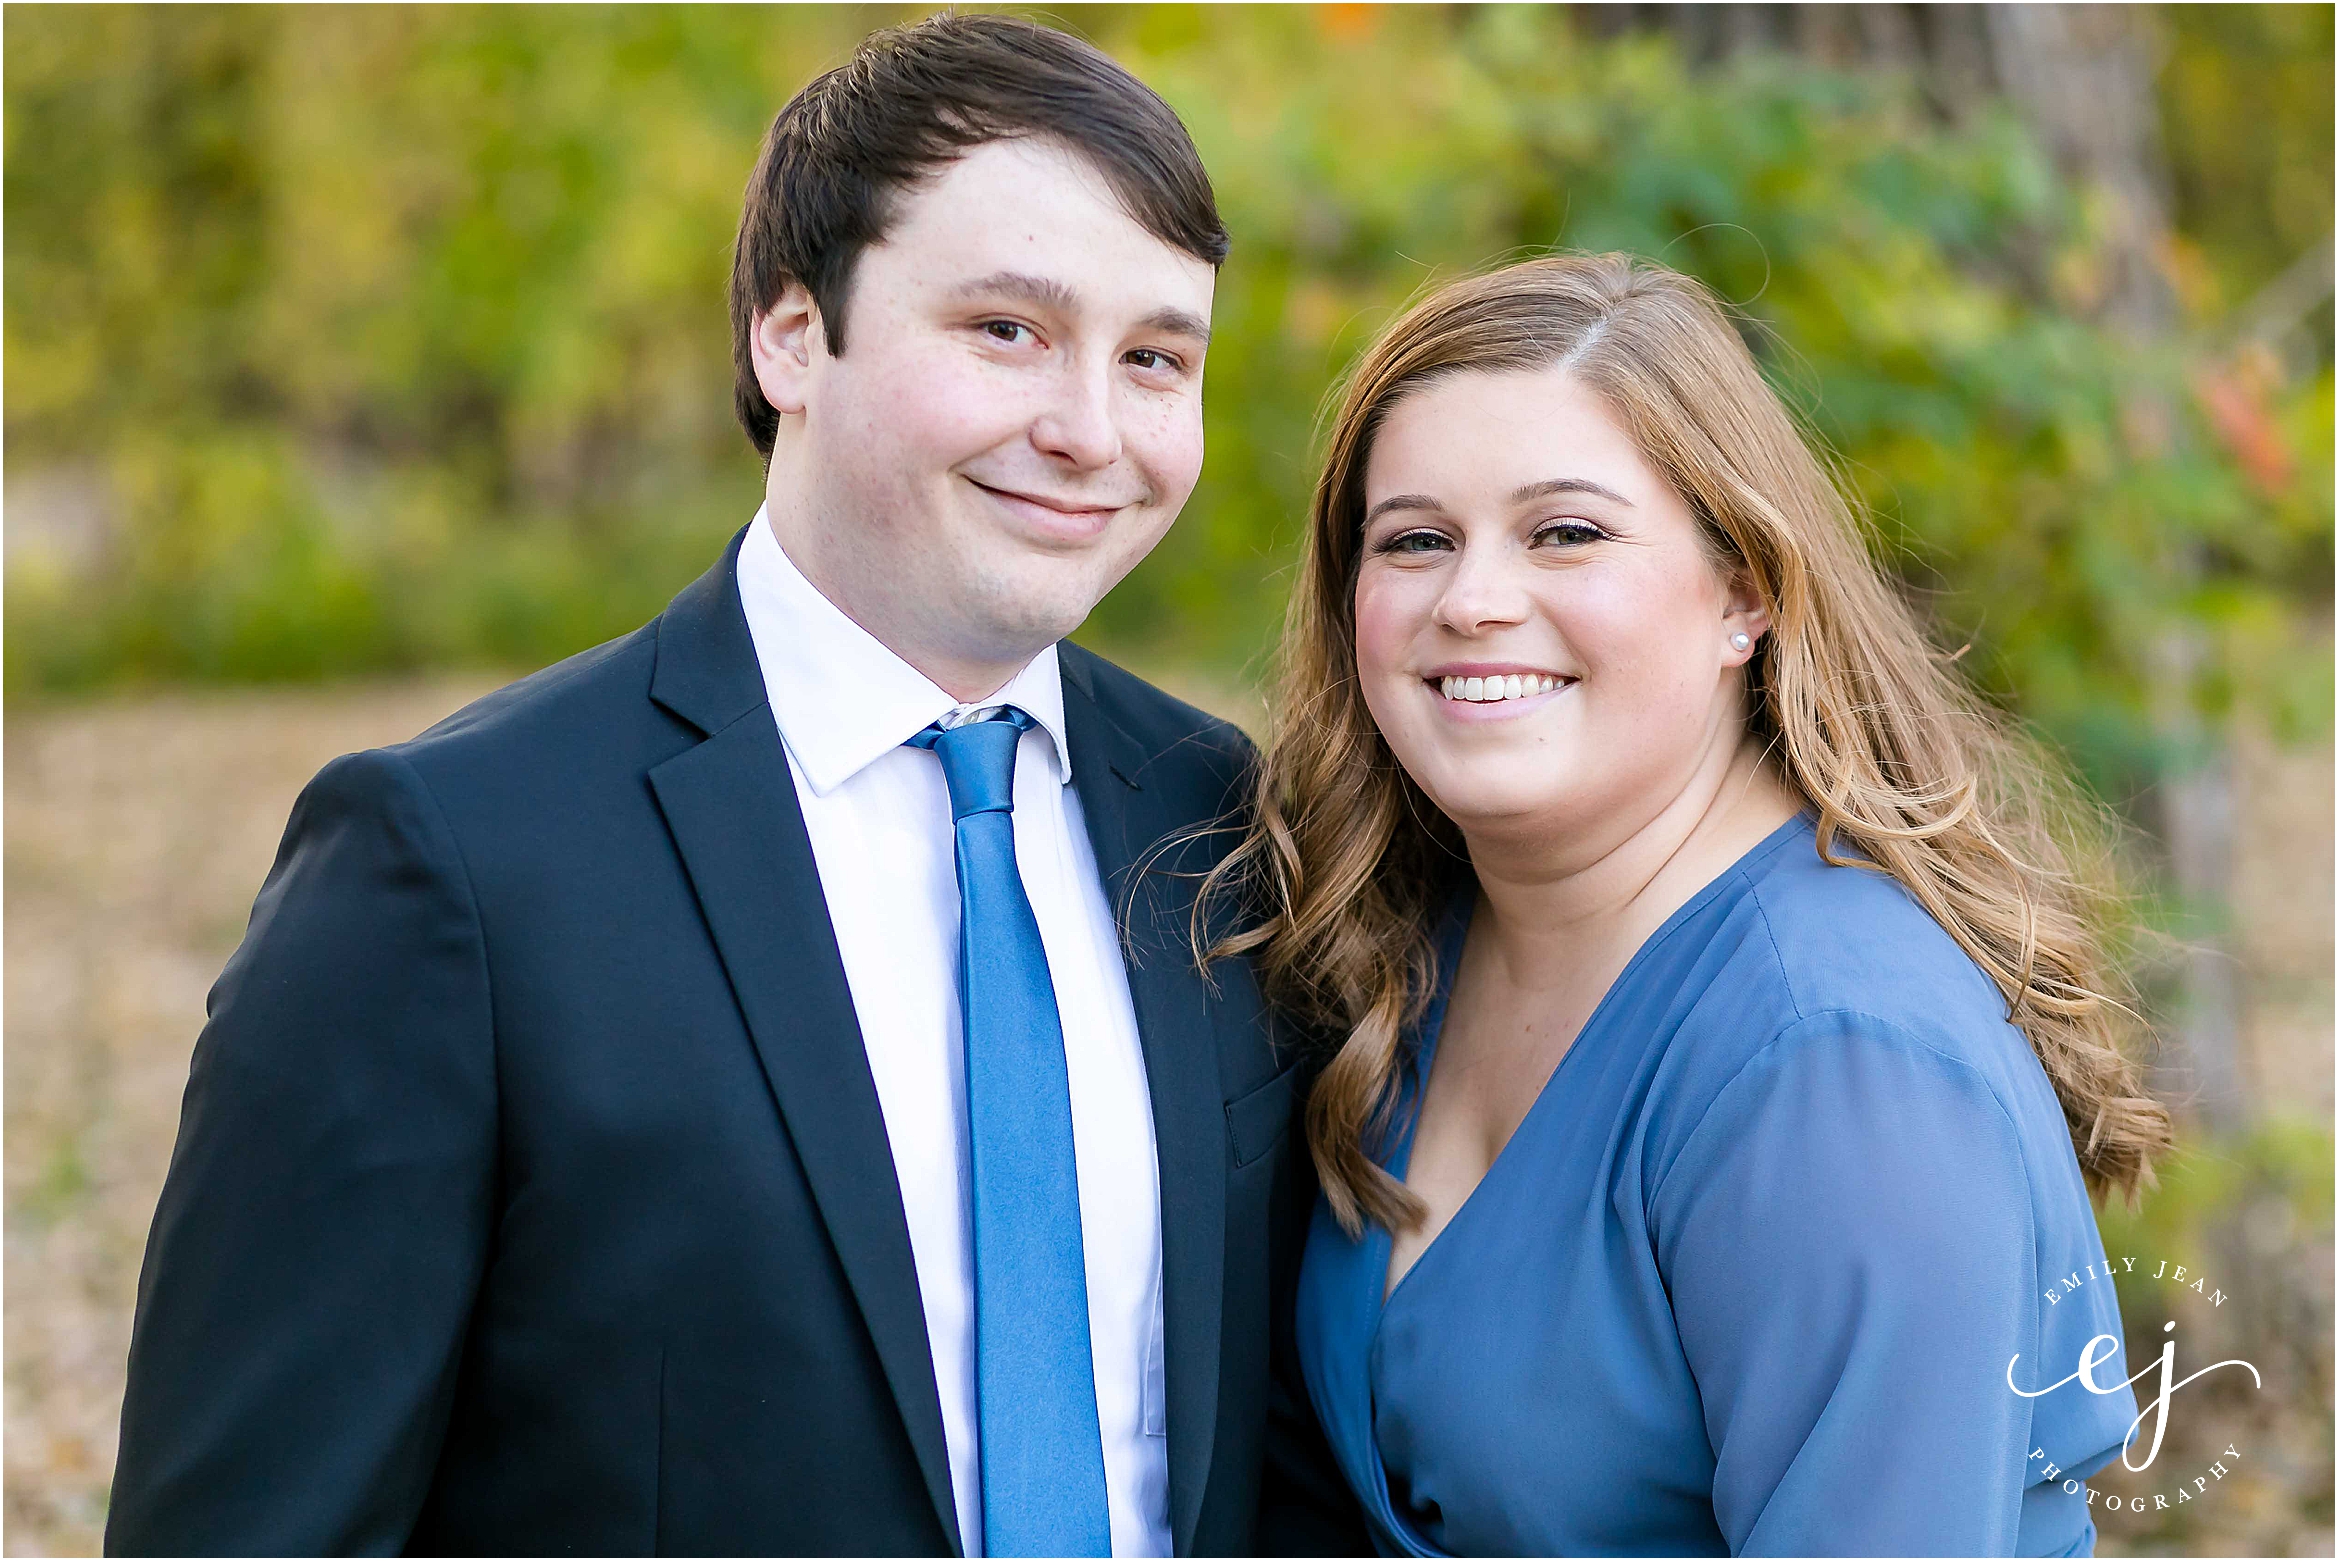 engagement session suit and tie long blue dress looking at camera smiling in park